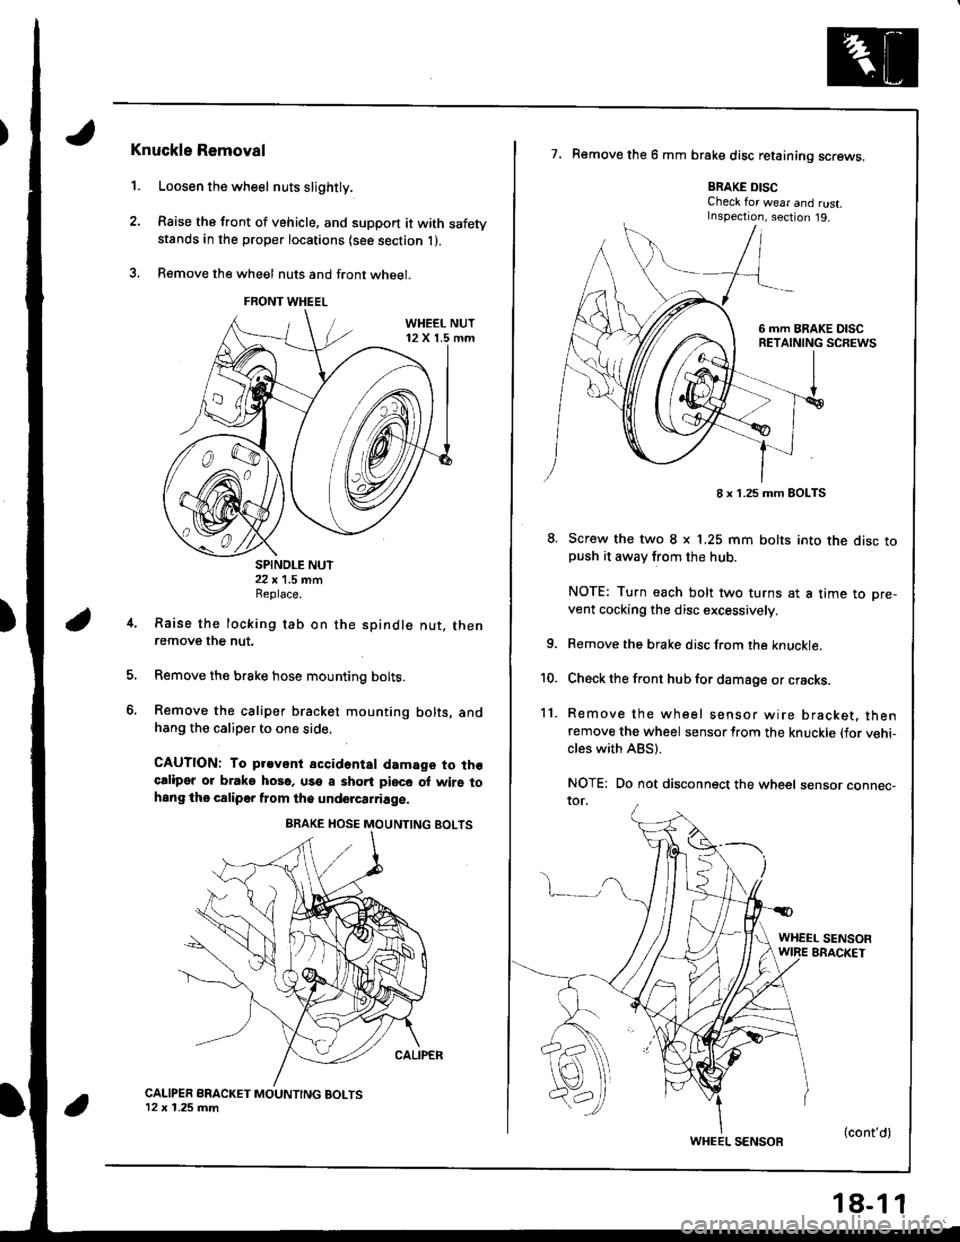 HONDA INTEGRA 1998 4.G User Guide 1.
Knuckle Removal
Loosen the wheel nuts slightly.
Raise the front of vehicle. and support it with safetystands in the proper locations {see section l ).
B€move the wheel nuts and front wheel.
SPIND